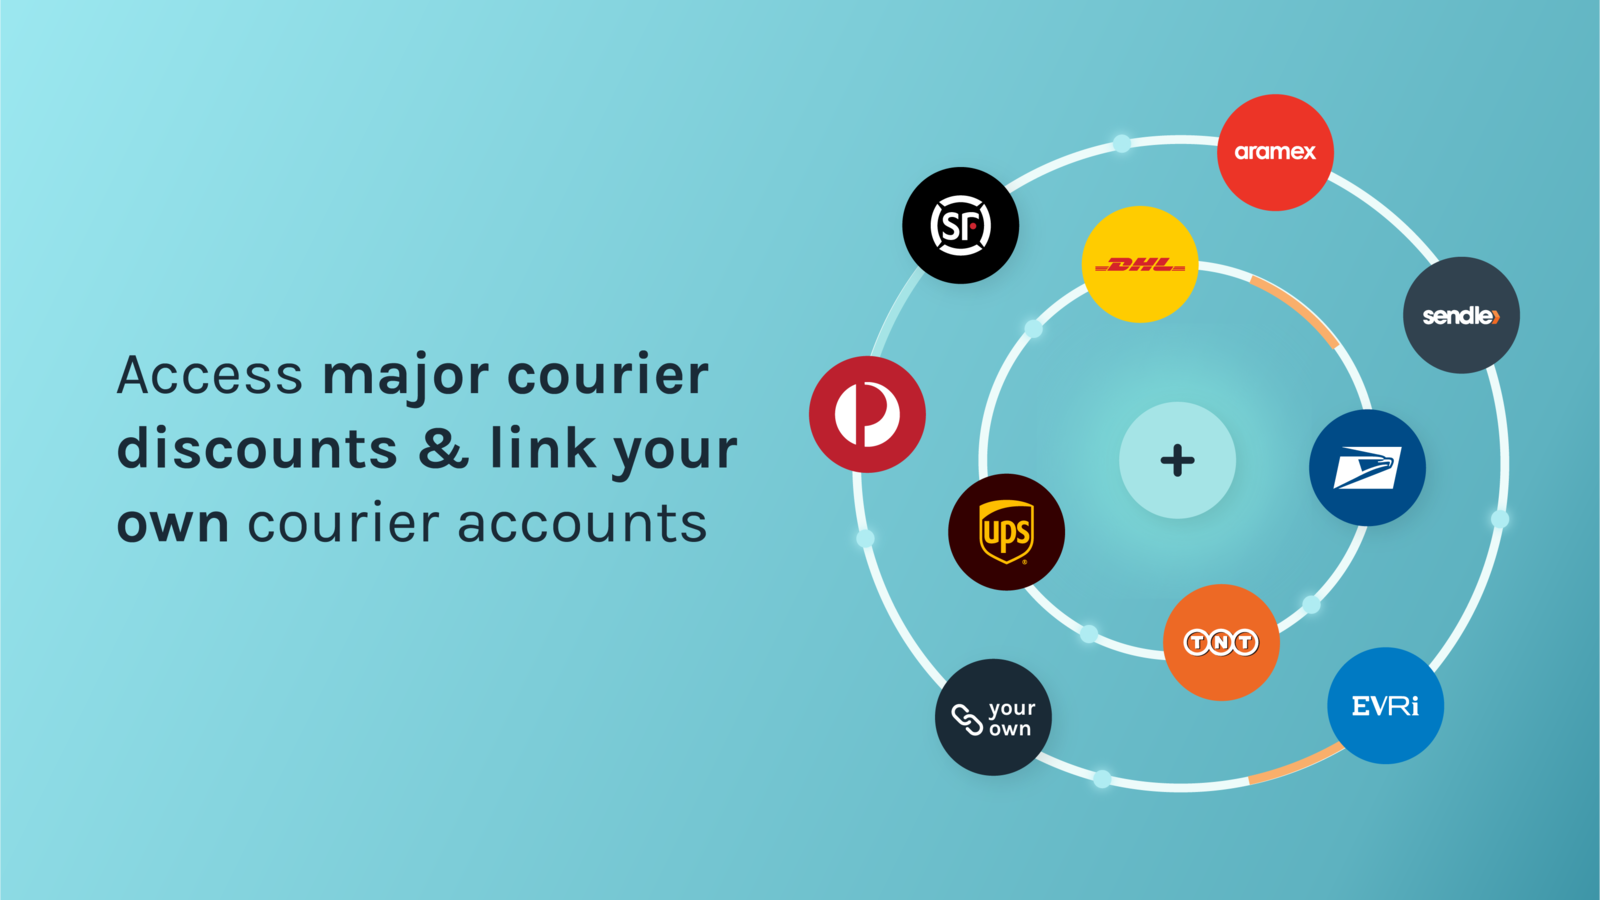 Access shipping carrier discounts & link your own accounts